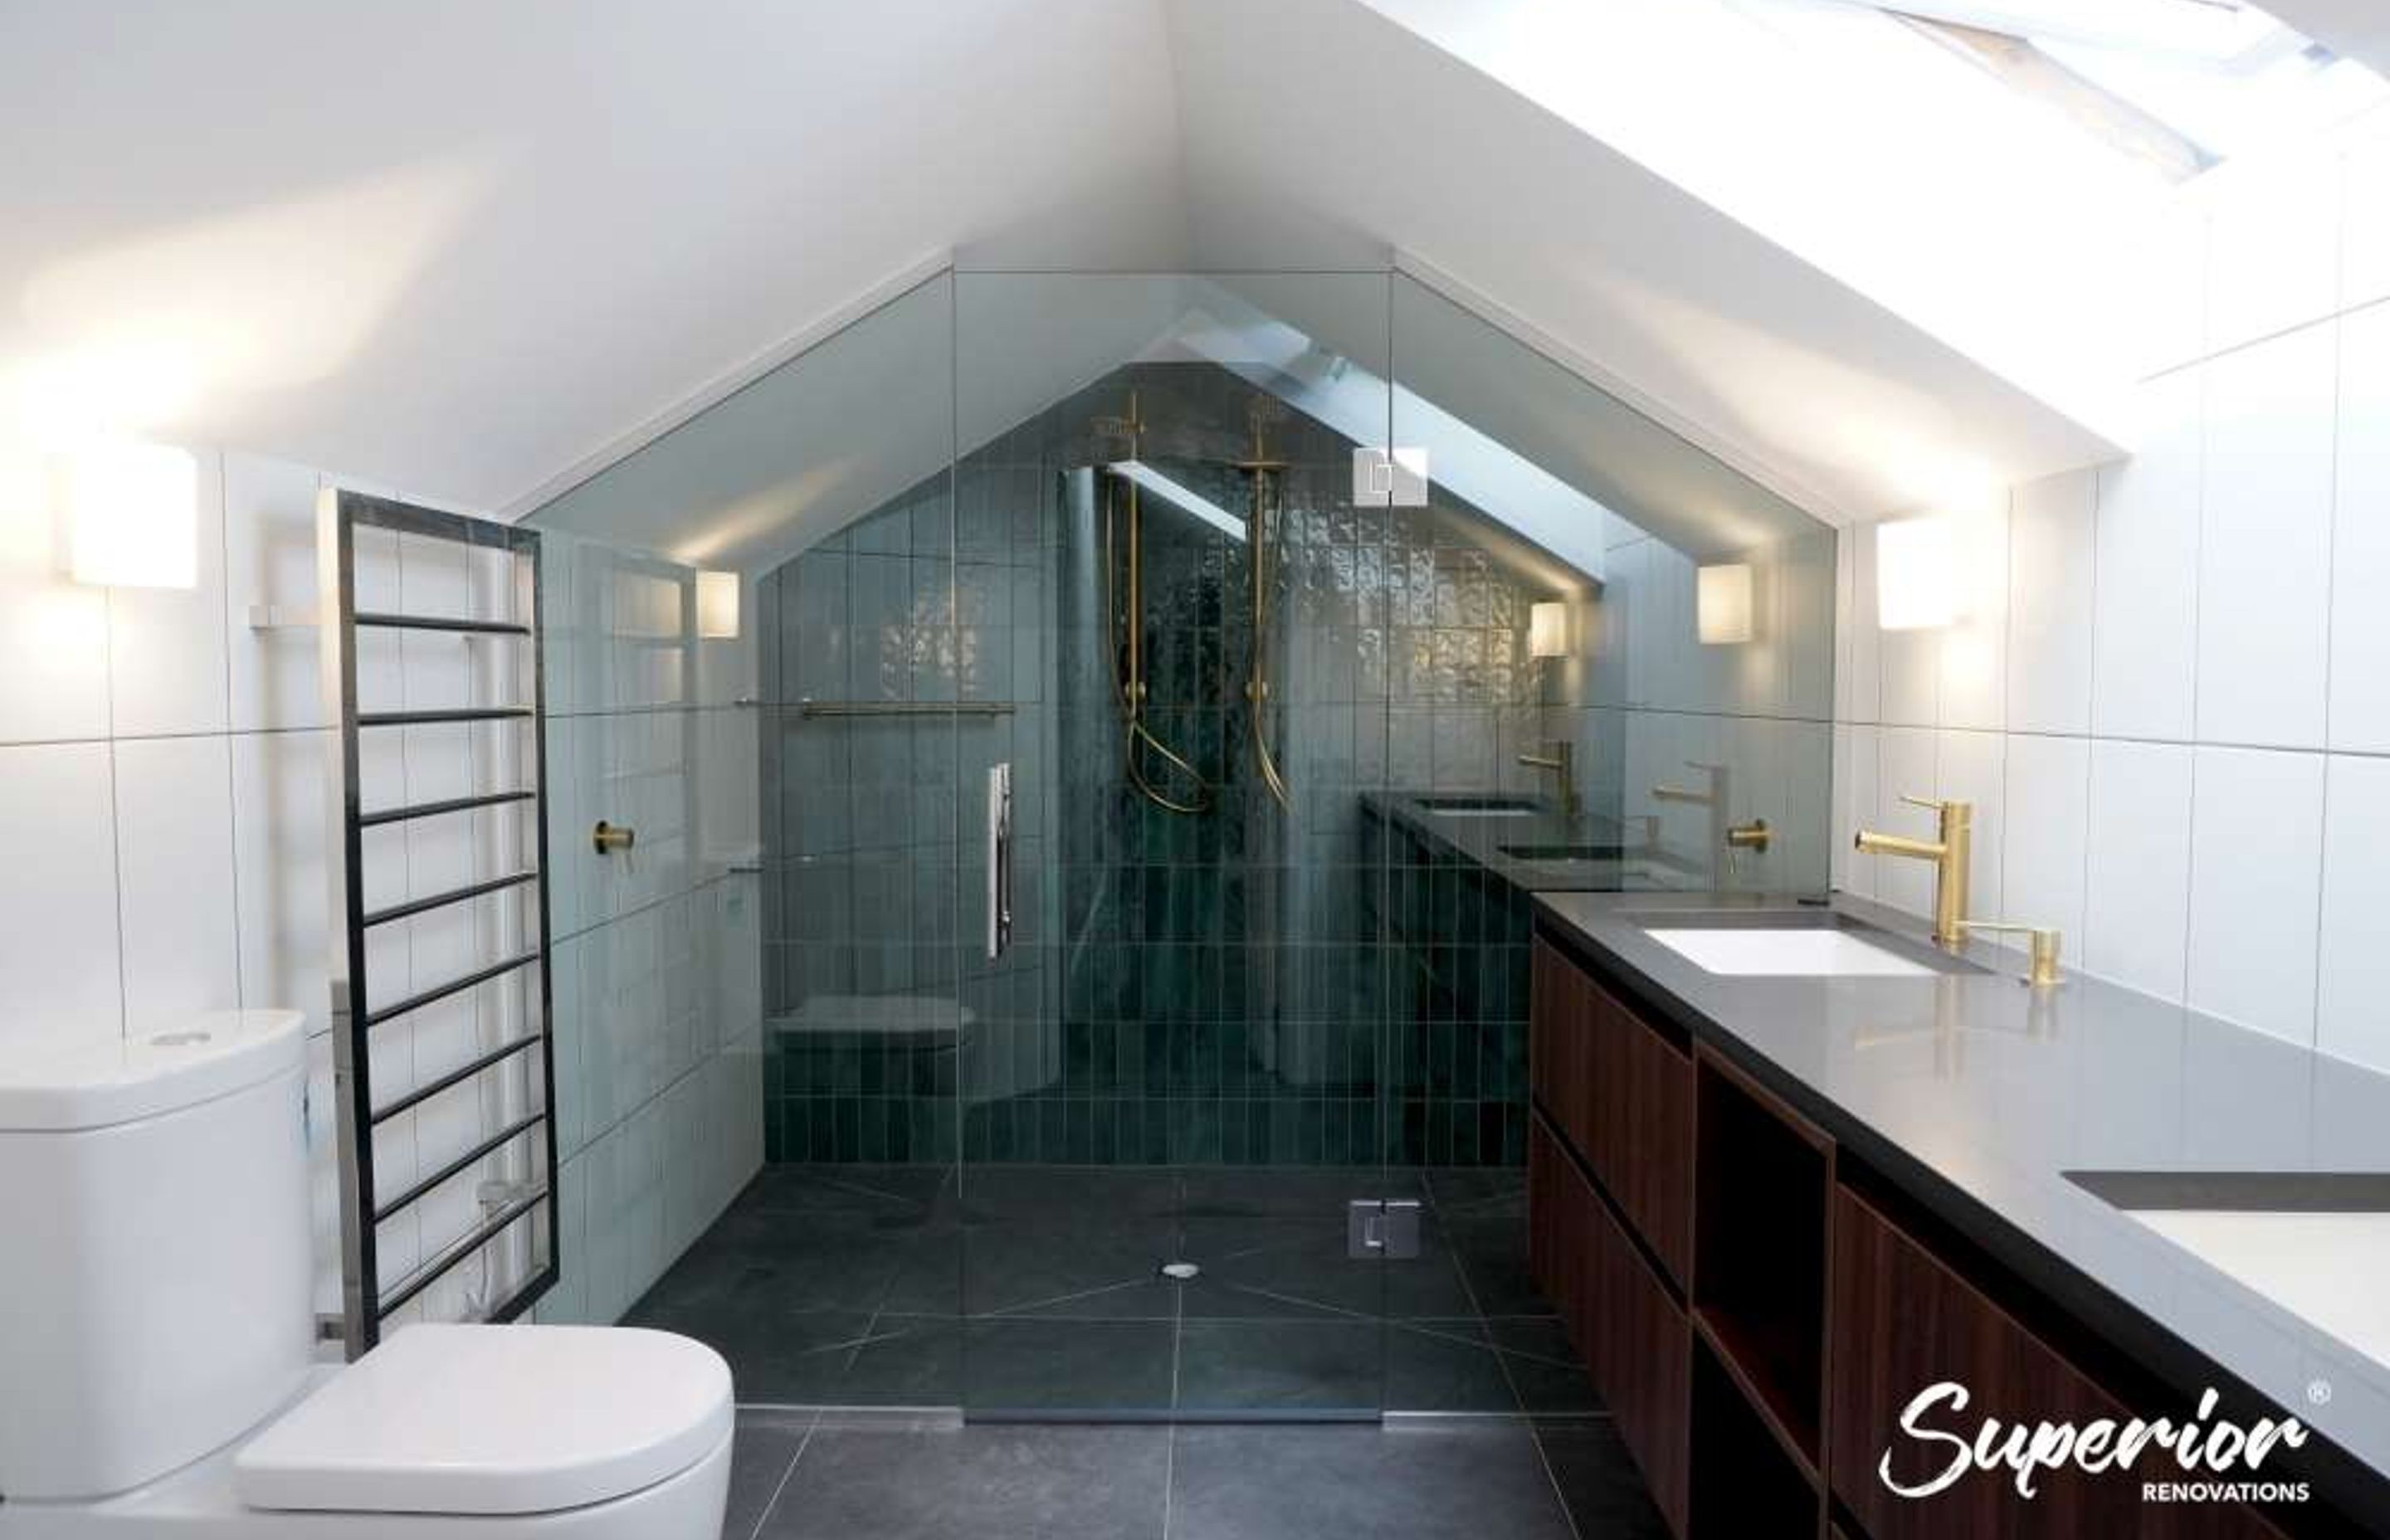 This bathroom was fully renovated in Westmere, Auckland. We created a wet area under the awkward roof area.